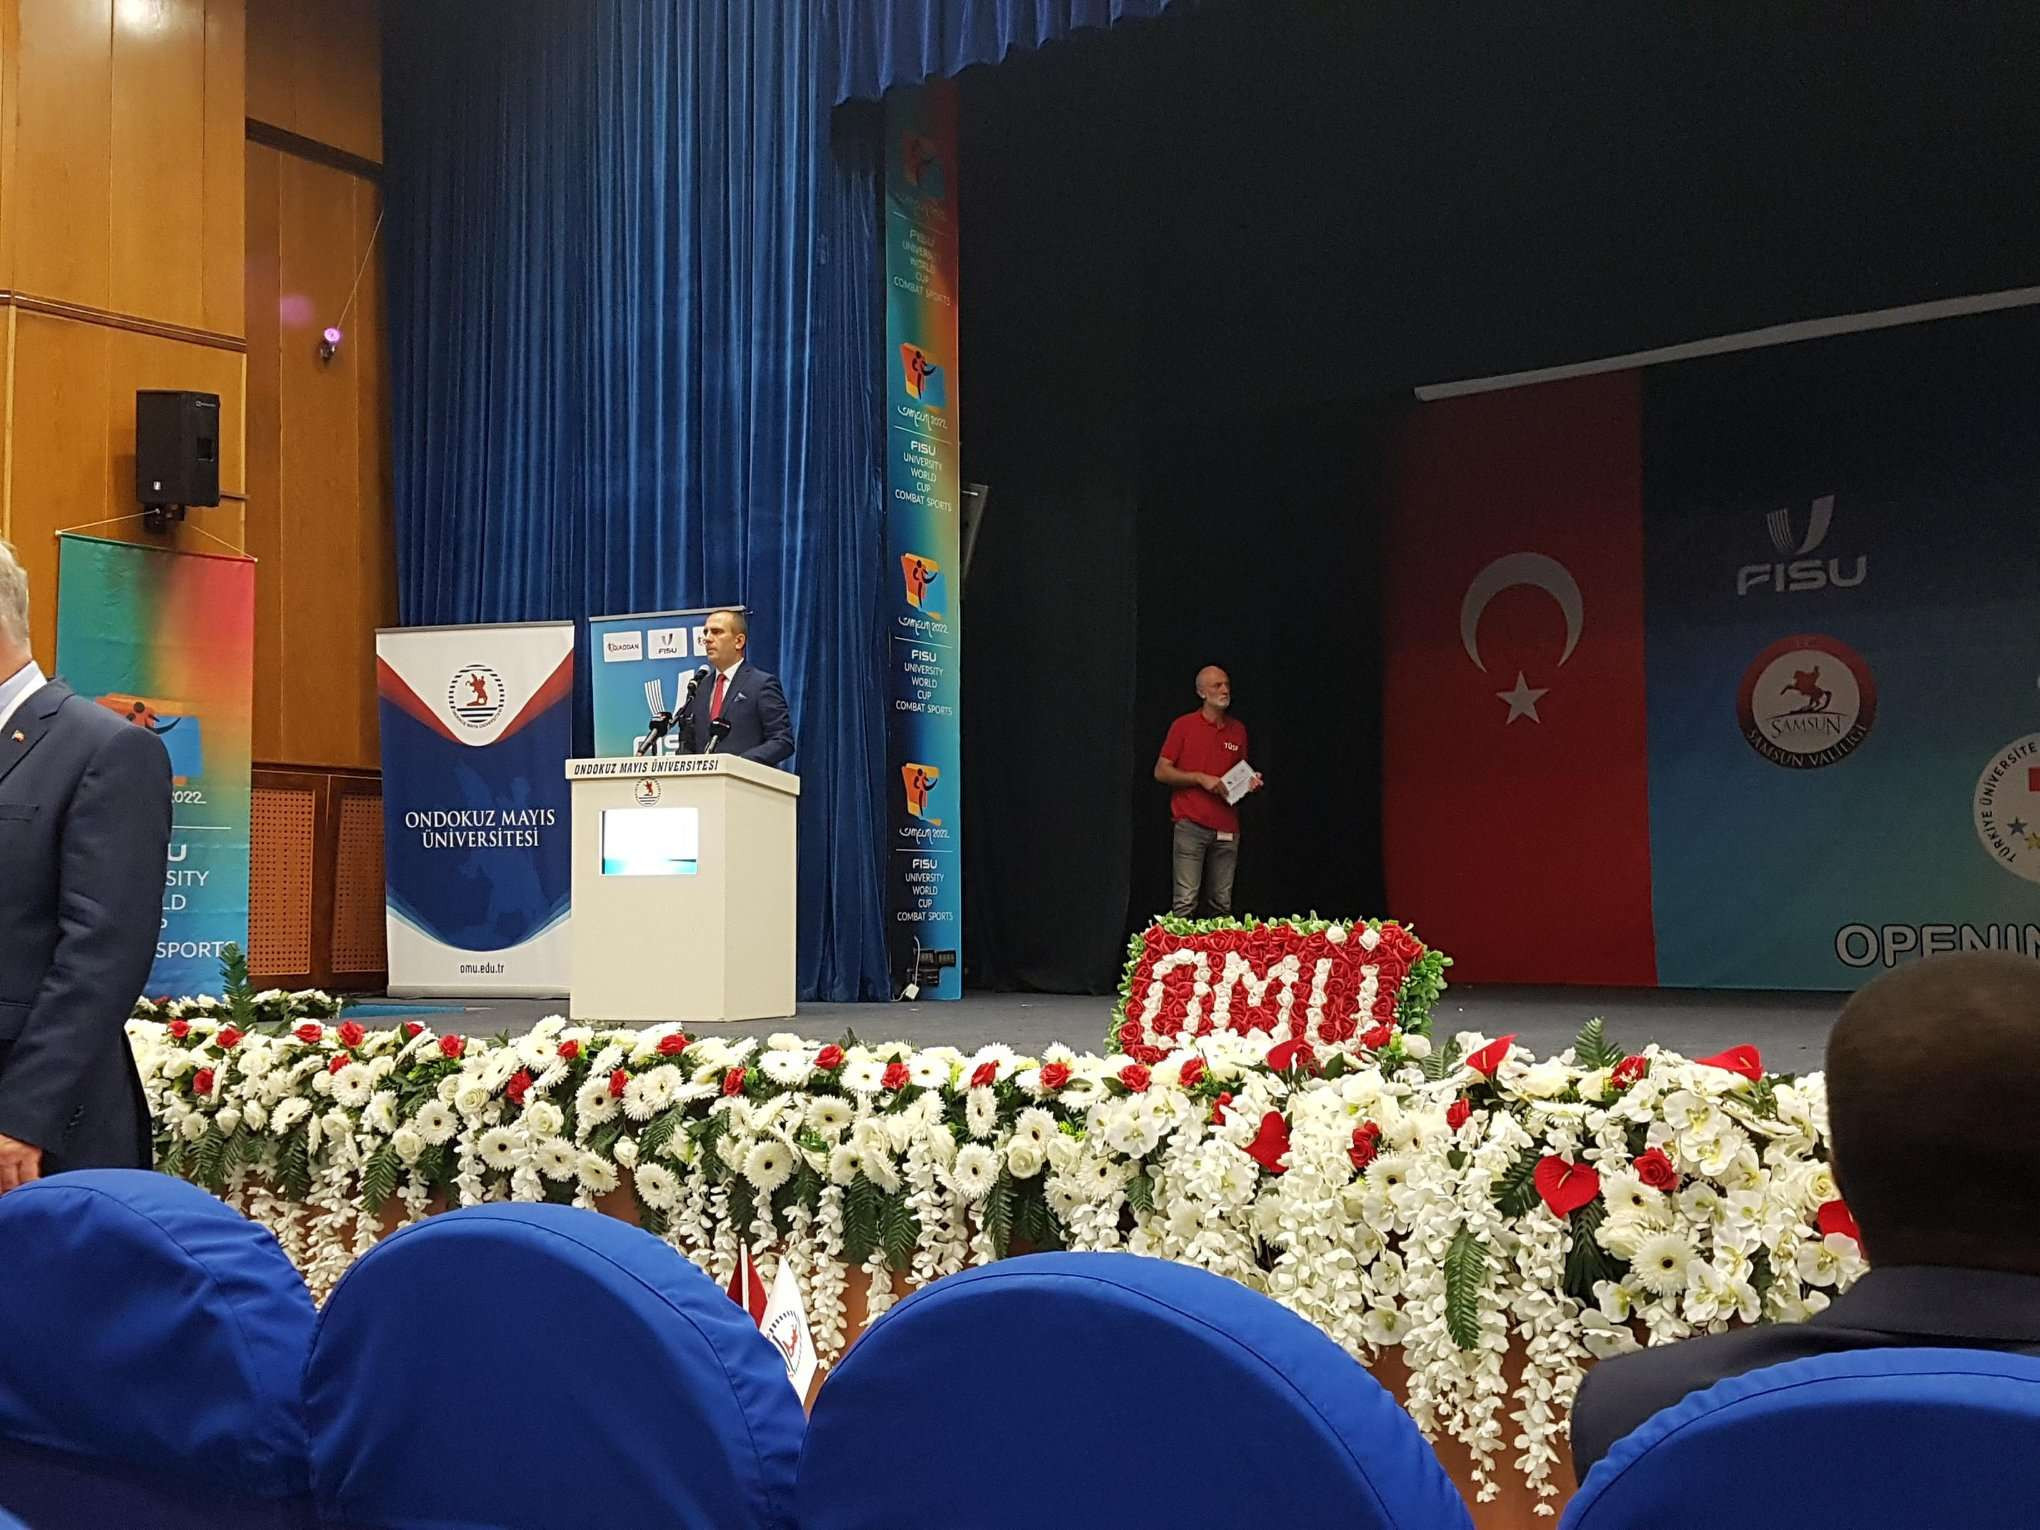 The Opening Ceremony for the World Cup was held at Ondokuz Mayıs University ©FISU